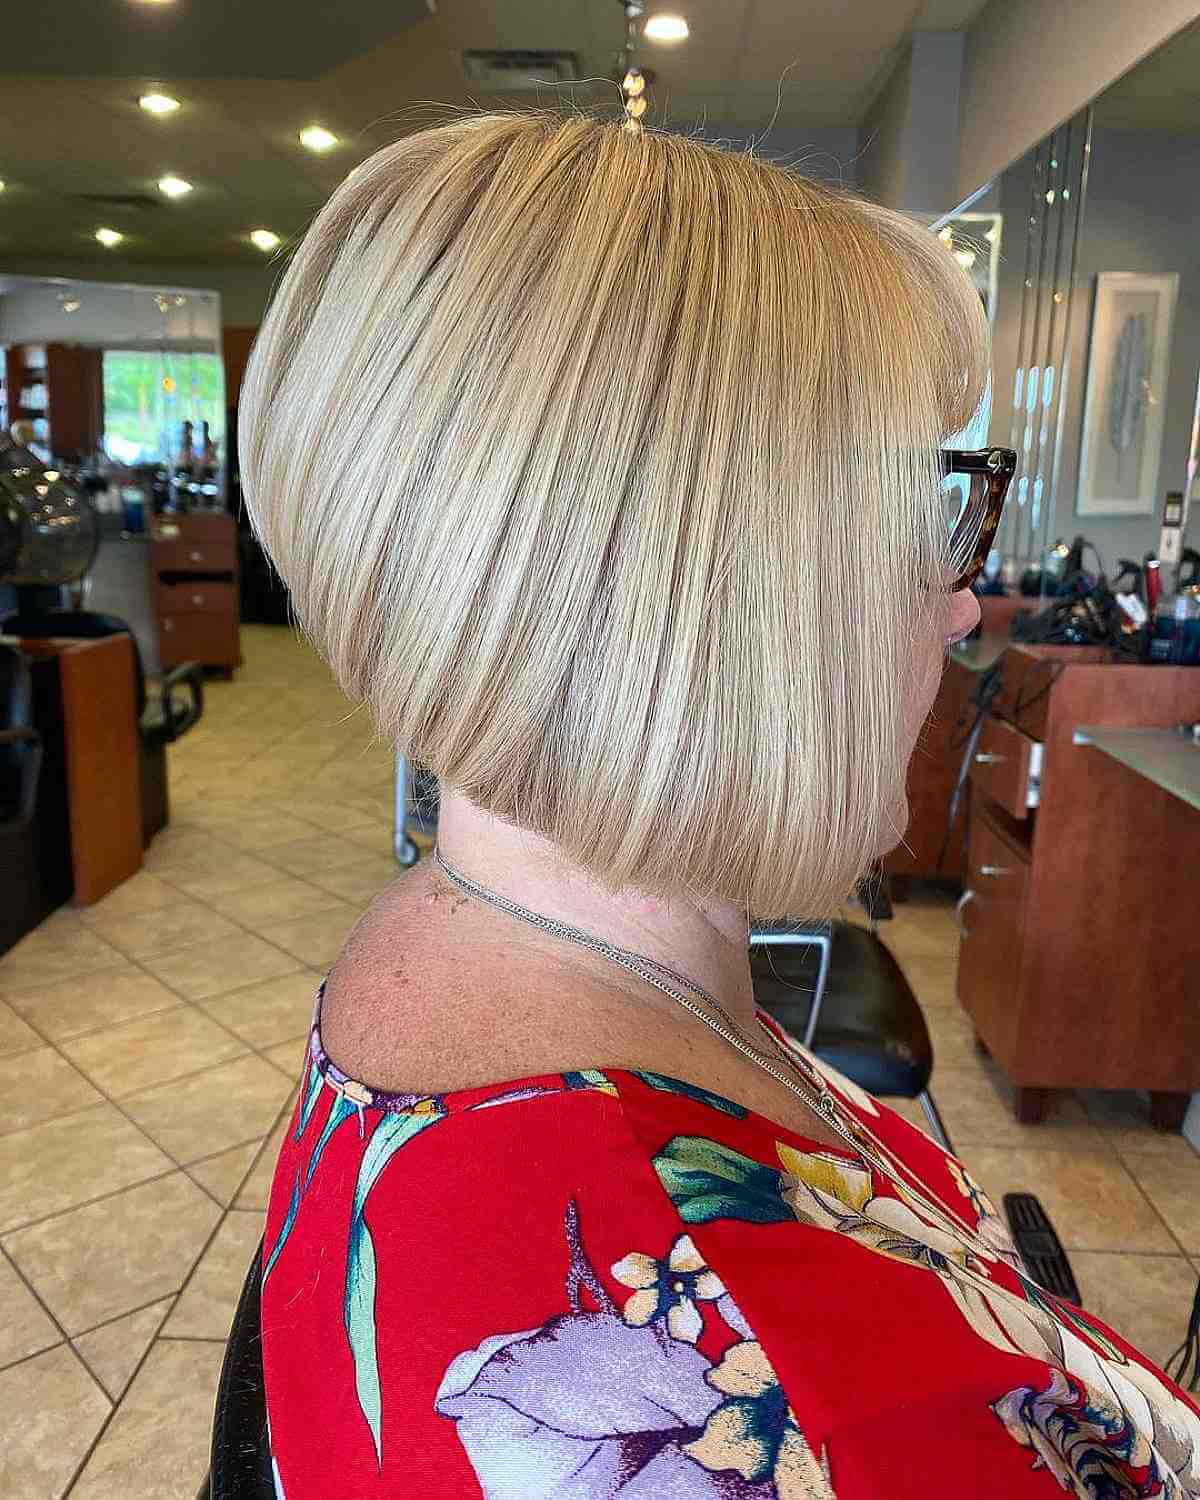 Jolie Blonde High Stacked Bob avec des couches